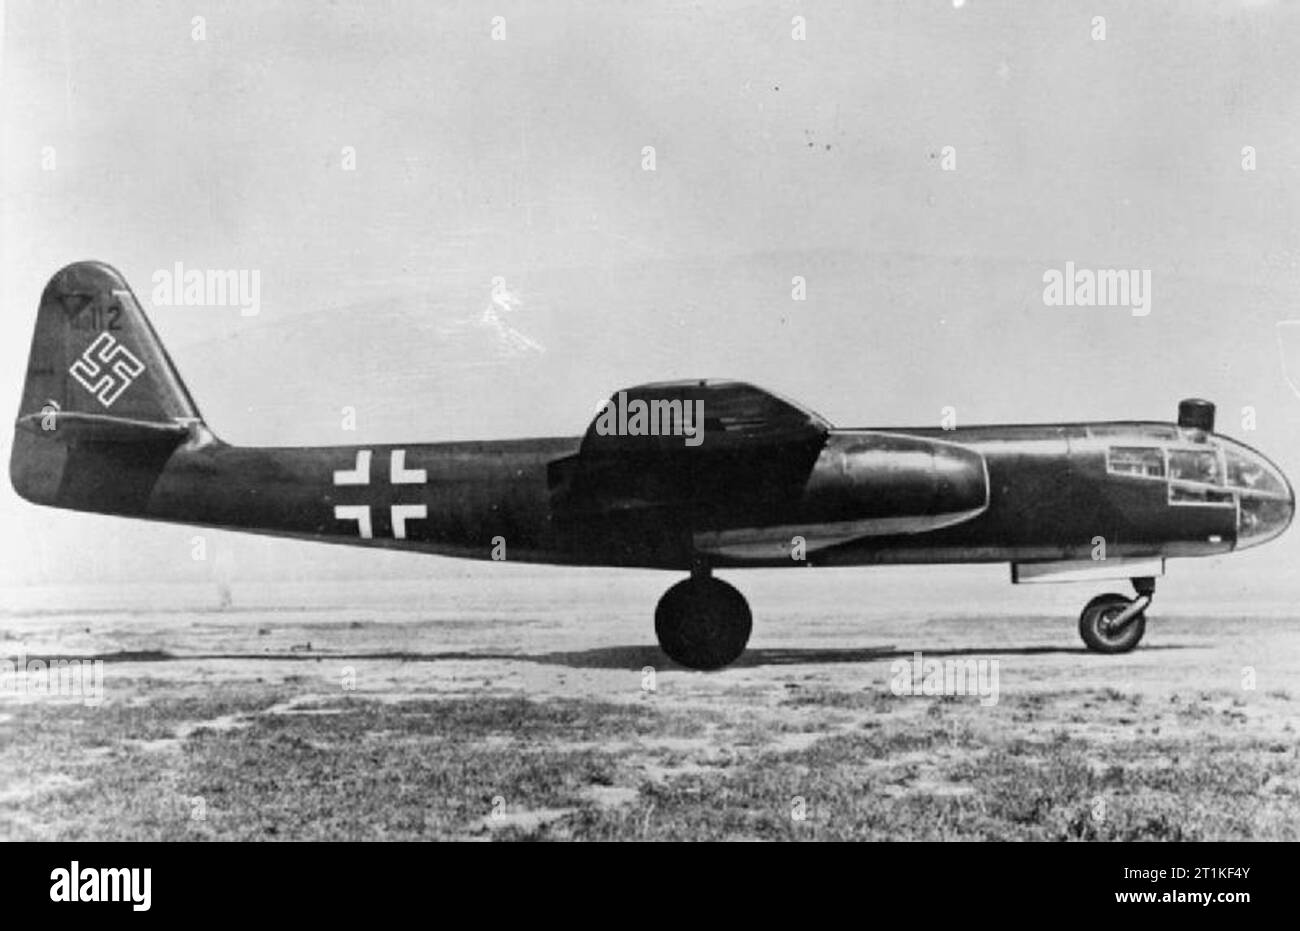 German Military Aircraft 1939-1945 Arado Ar 234 'Blitz' (Lightning) jet bomber and reconnaissance aircraft. The world's first jet bomber, the Ar 234 entered production in June 1944 but only saw limited operational service. Most famously, aircraft of KG 76 launched almost suicidal attacks against the American held bridge over the Rhine at Remagen in March 1945. Stock Photo